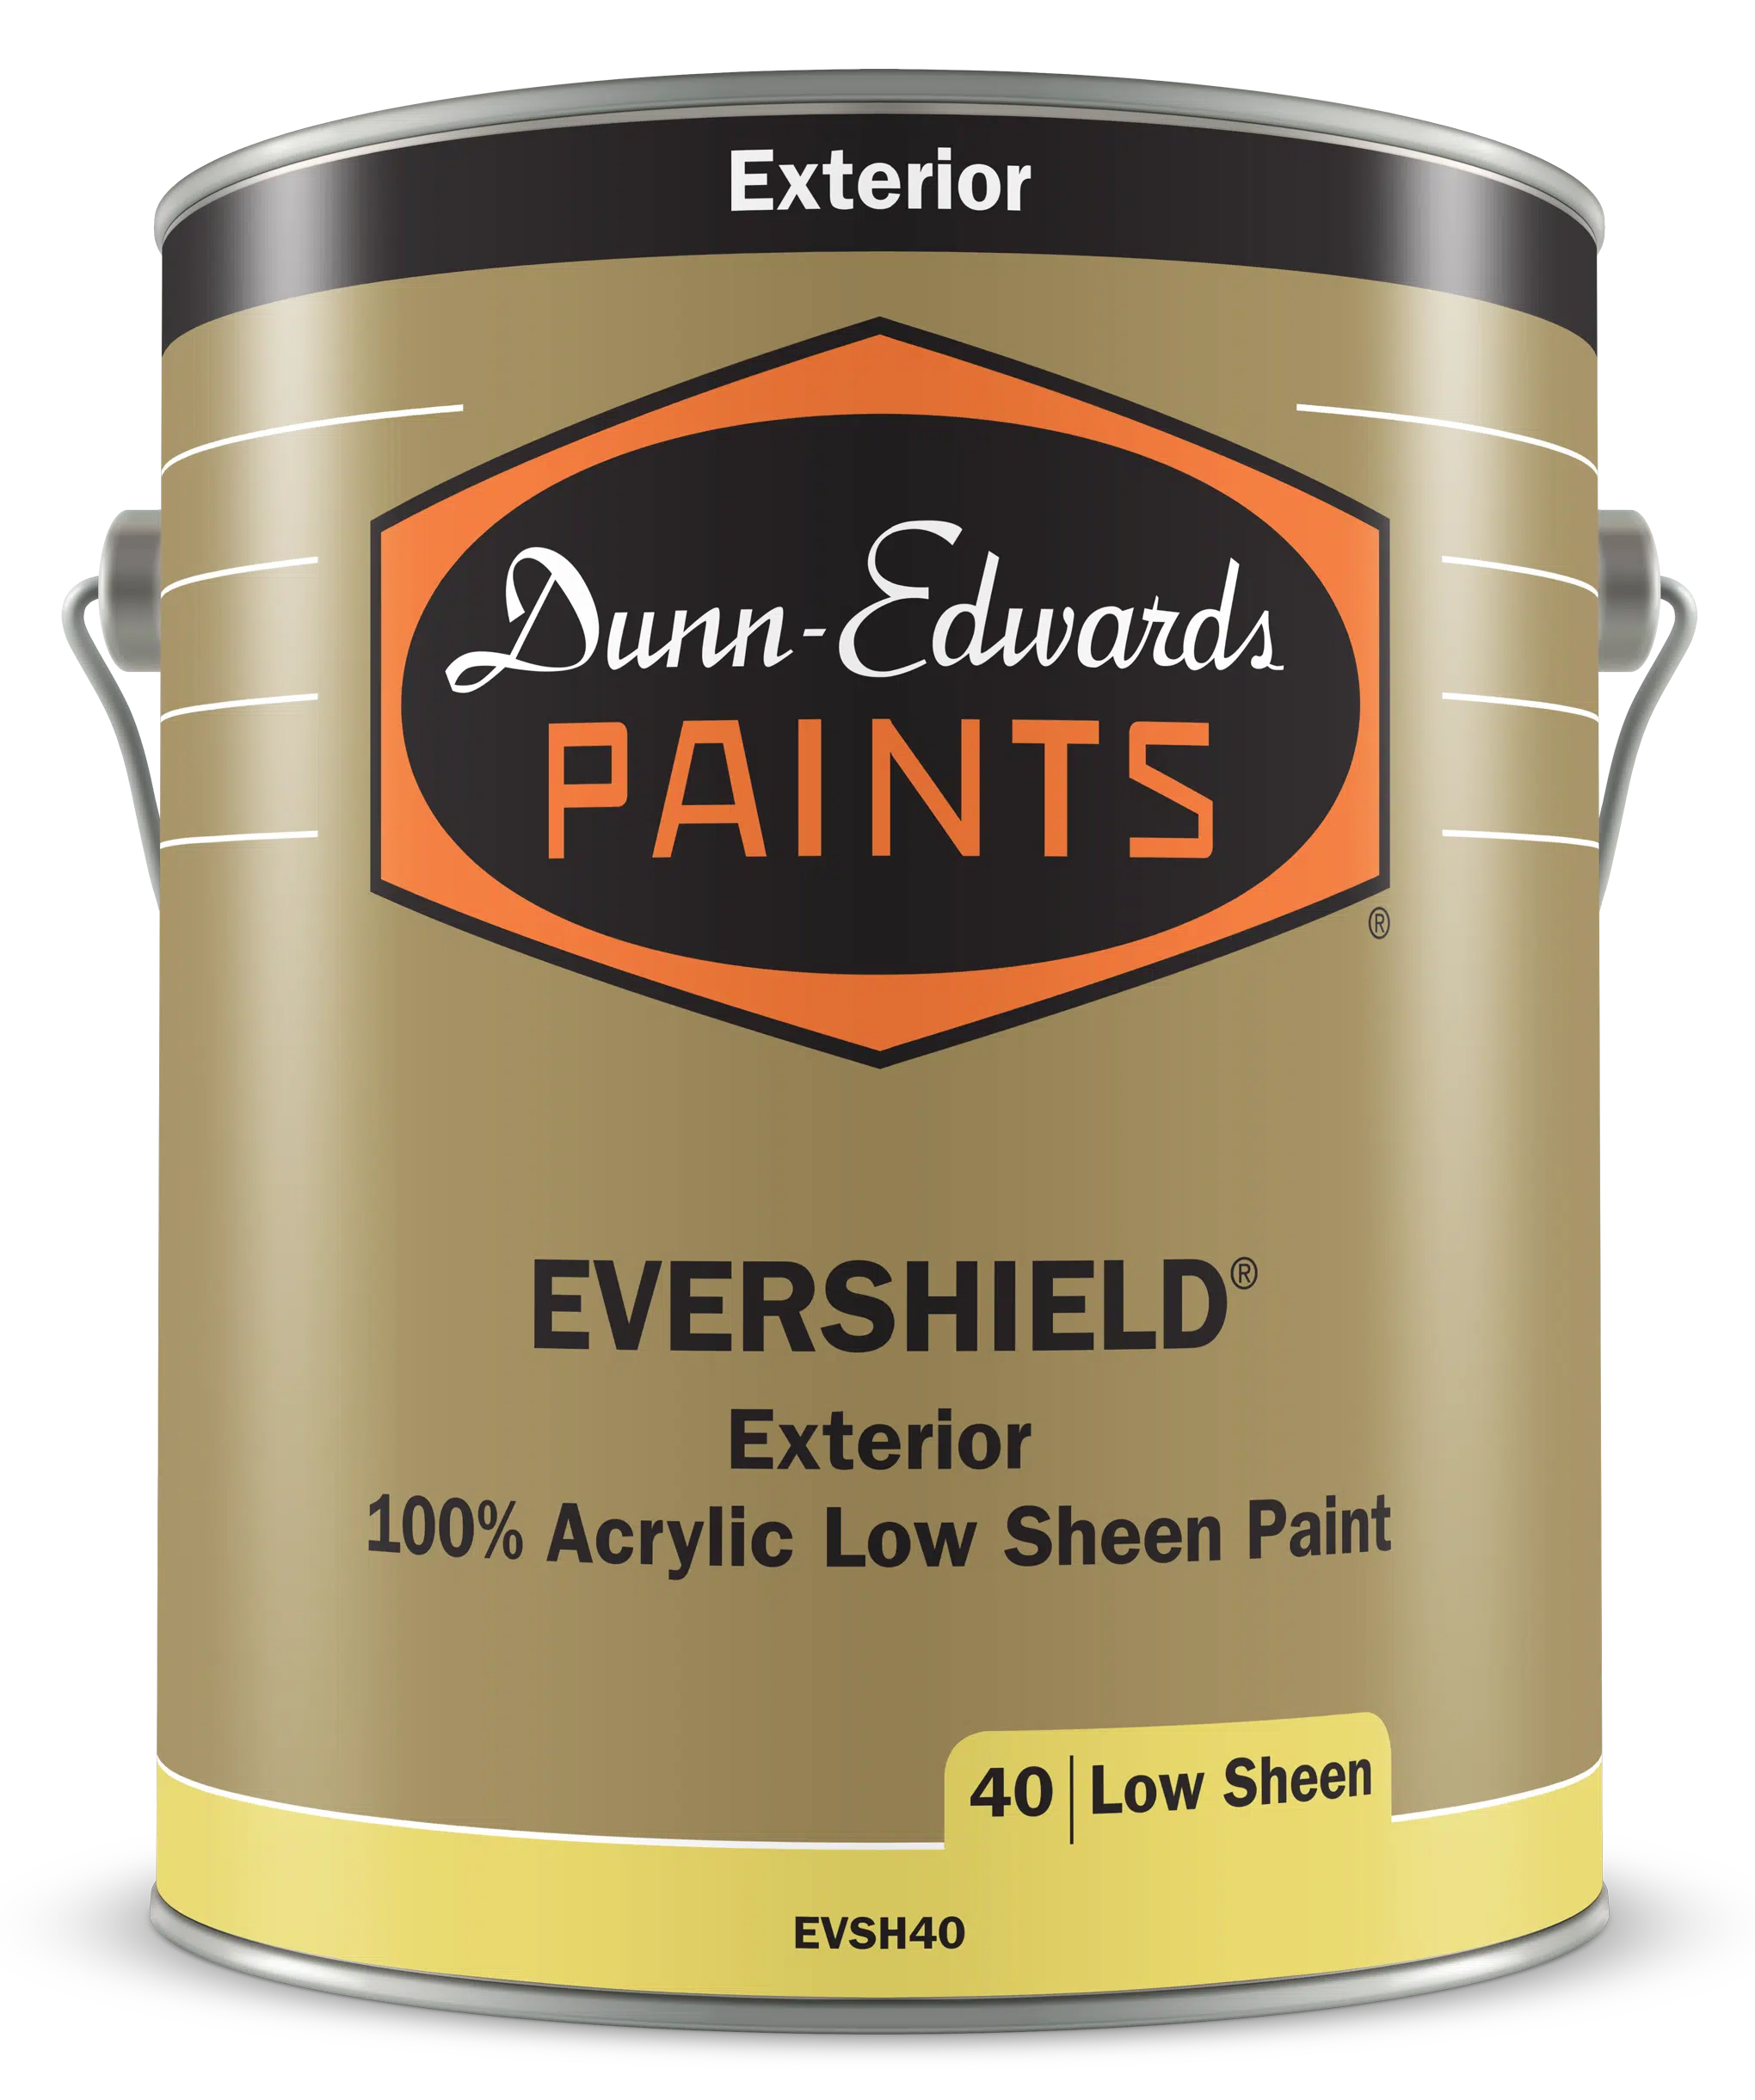 EVERSHIELD Exterior 100% Acrylic Low Sheen Paint Can